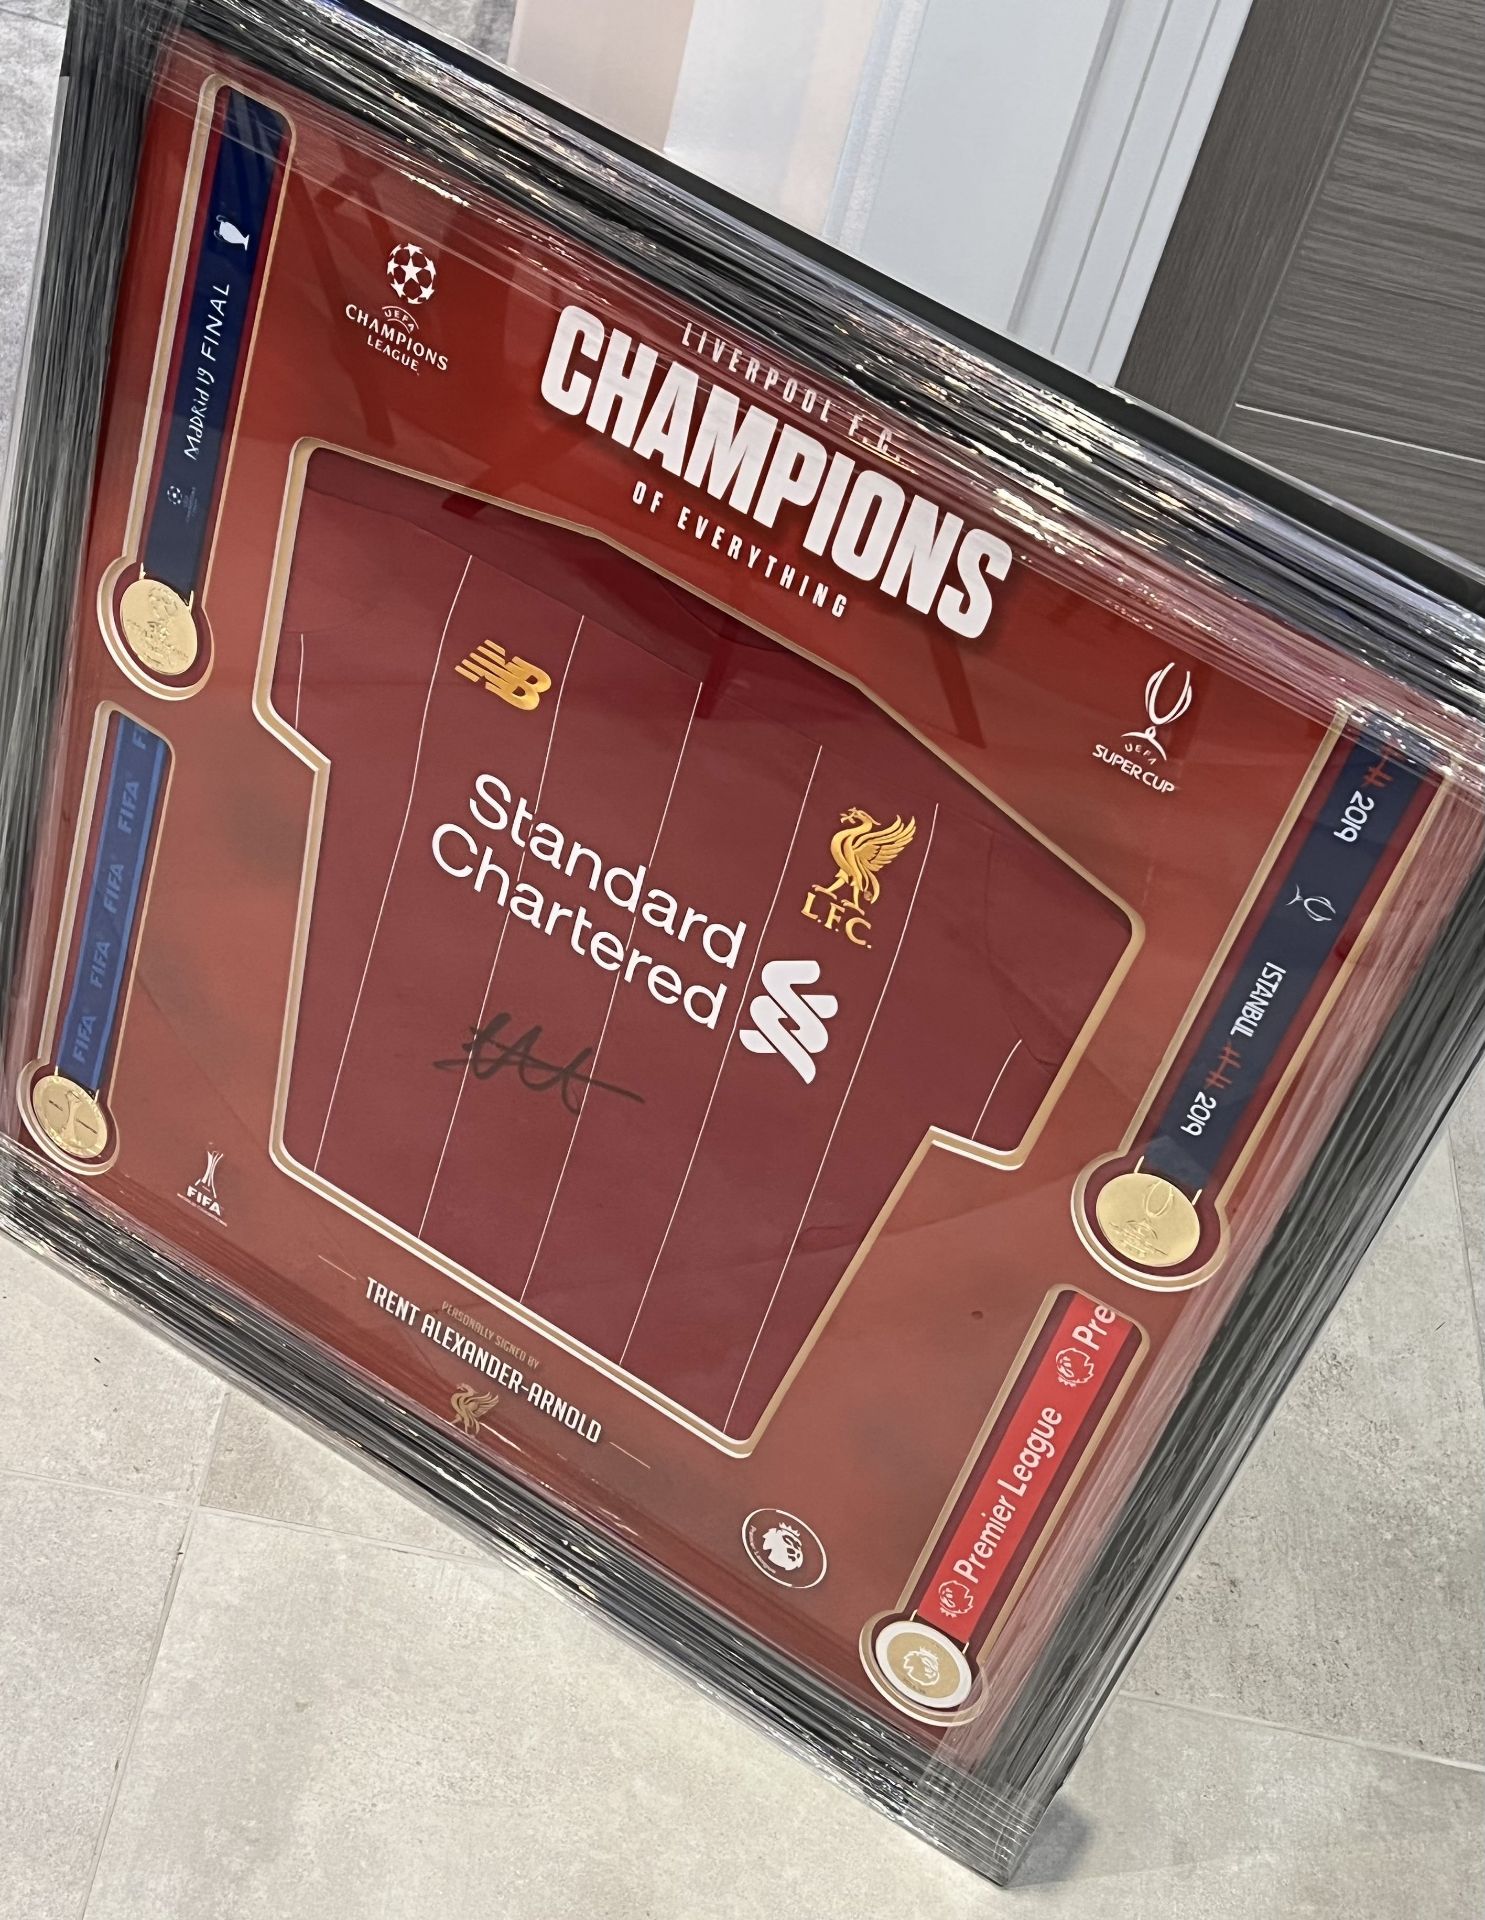 Trent Alexander-Arnold hand Signed Liverpool Champions framed football shirt with inset winners - Image 2 of 6